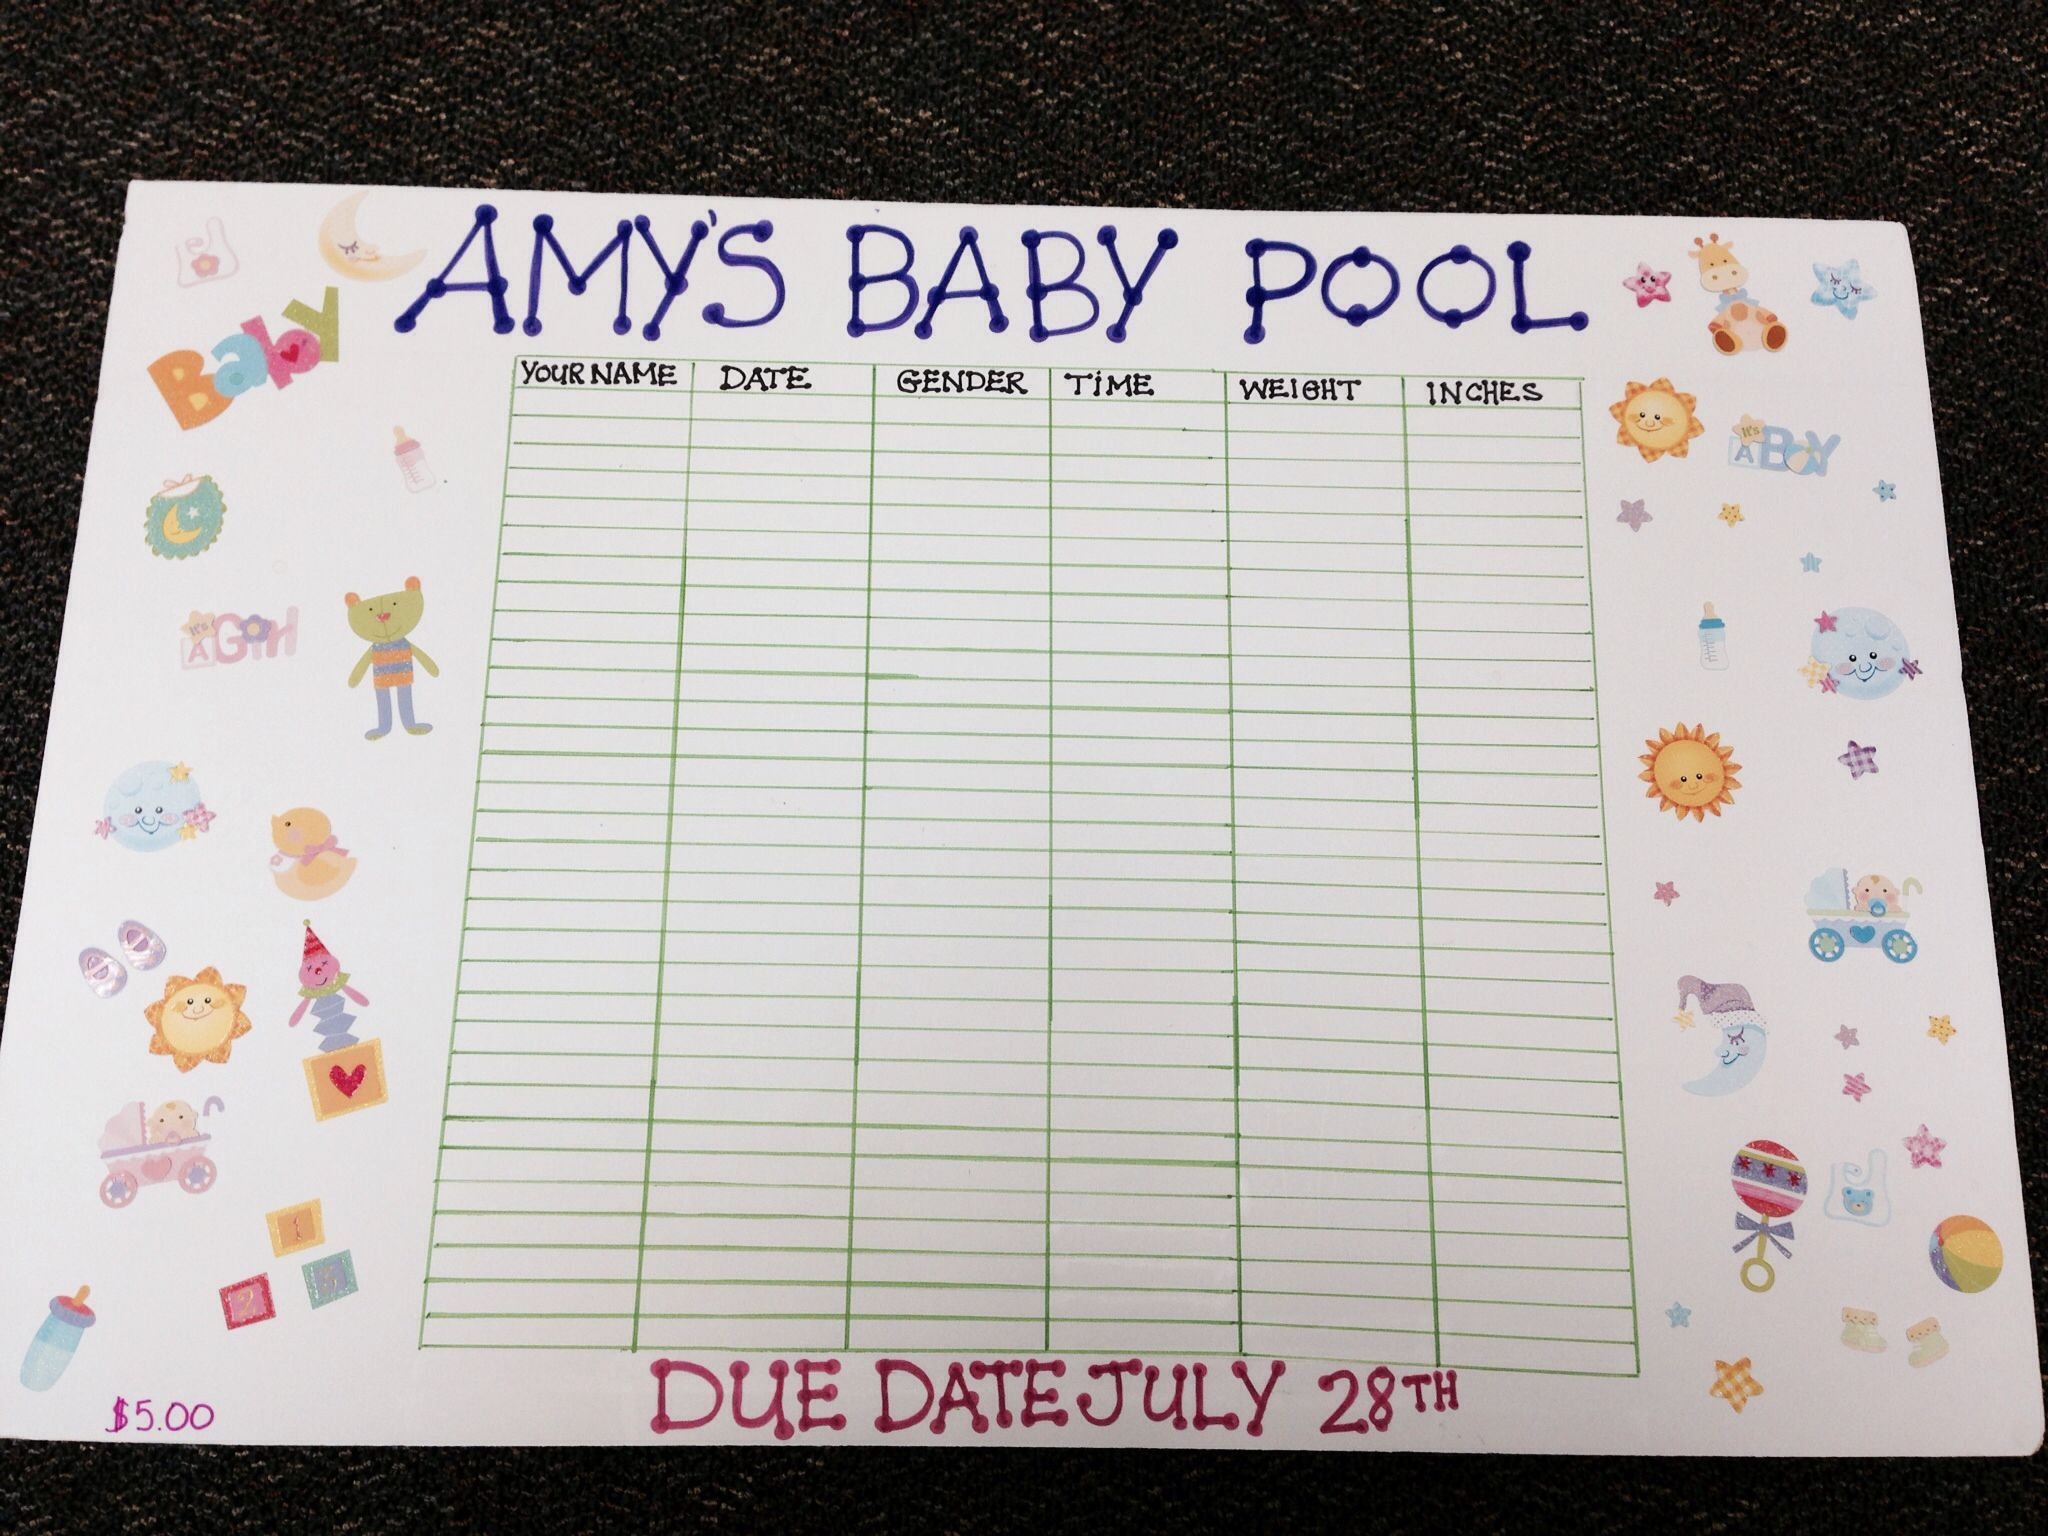 Universal Guess The Baby Weight And Date Template Get Your Calendar Printable